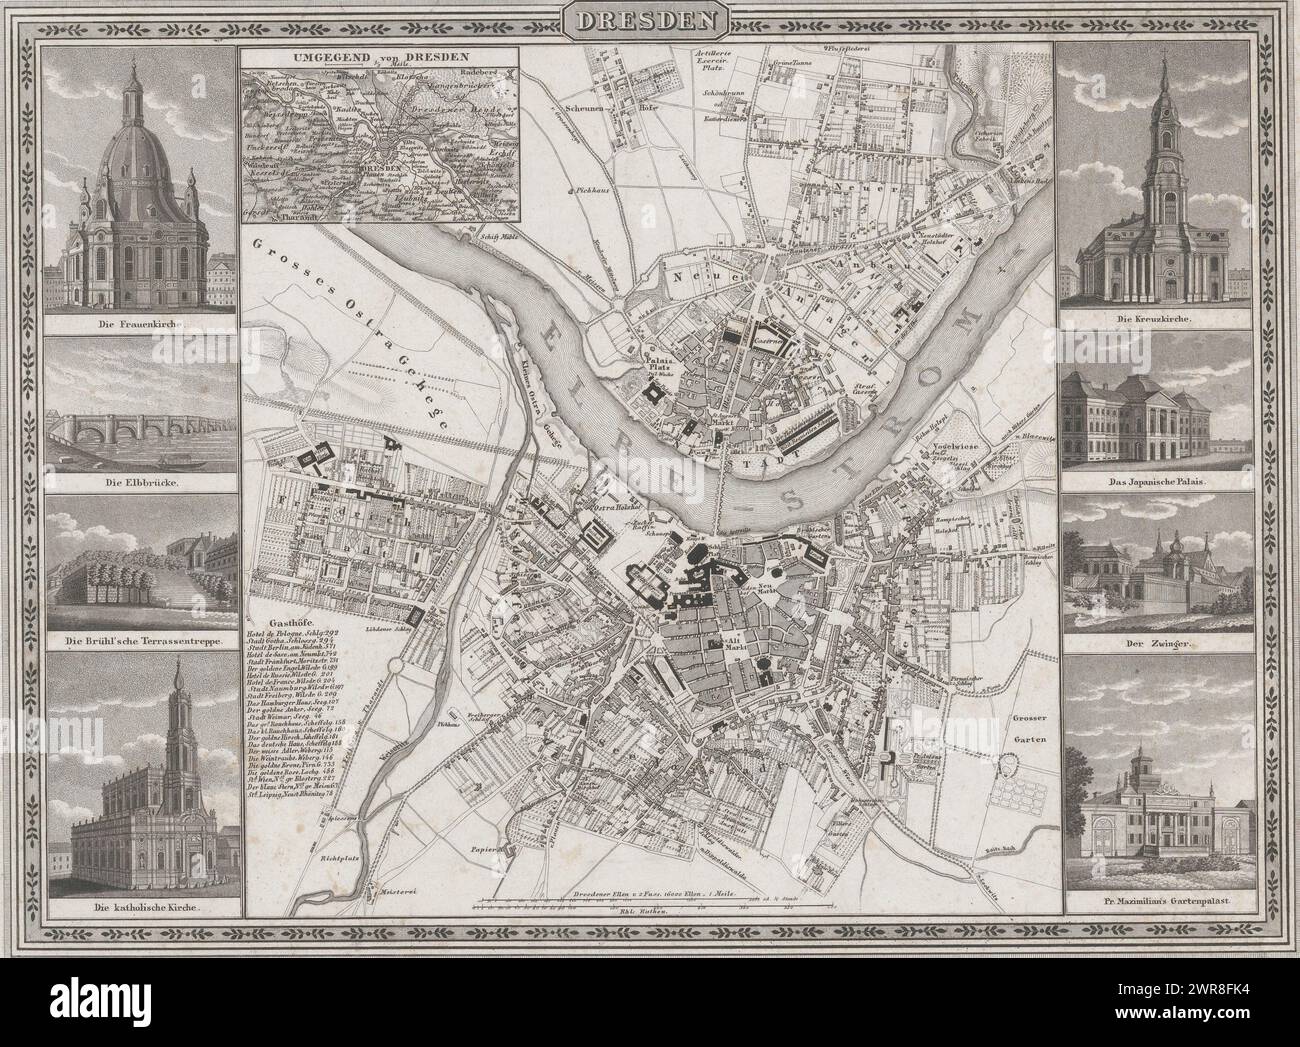 Map of Dresden with views of buildings in the city, Dresden (title on object), Top left an inset with a map of the Dresden area. Left and right four views of important buildings in the city. Marked top right: Meyers Städte Atlas No. 3., print maker: Bibliographisches Institut, printer: Bibliographisches Institut, publisher: Bibliographisches Institut, Hildburghausen, 1728 - 1774, paper, height 261 mm × width 355 mm, print Stock Photo